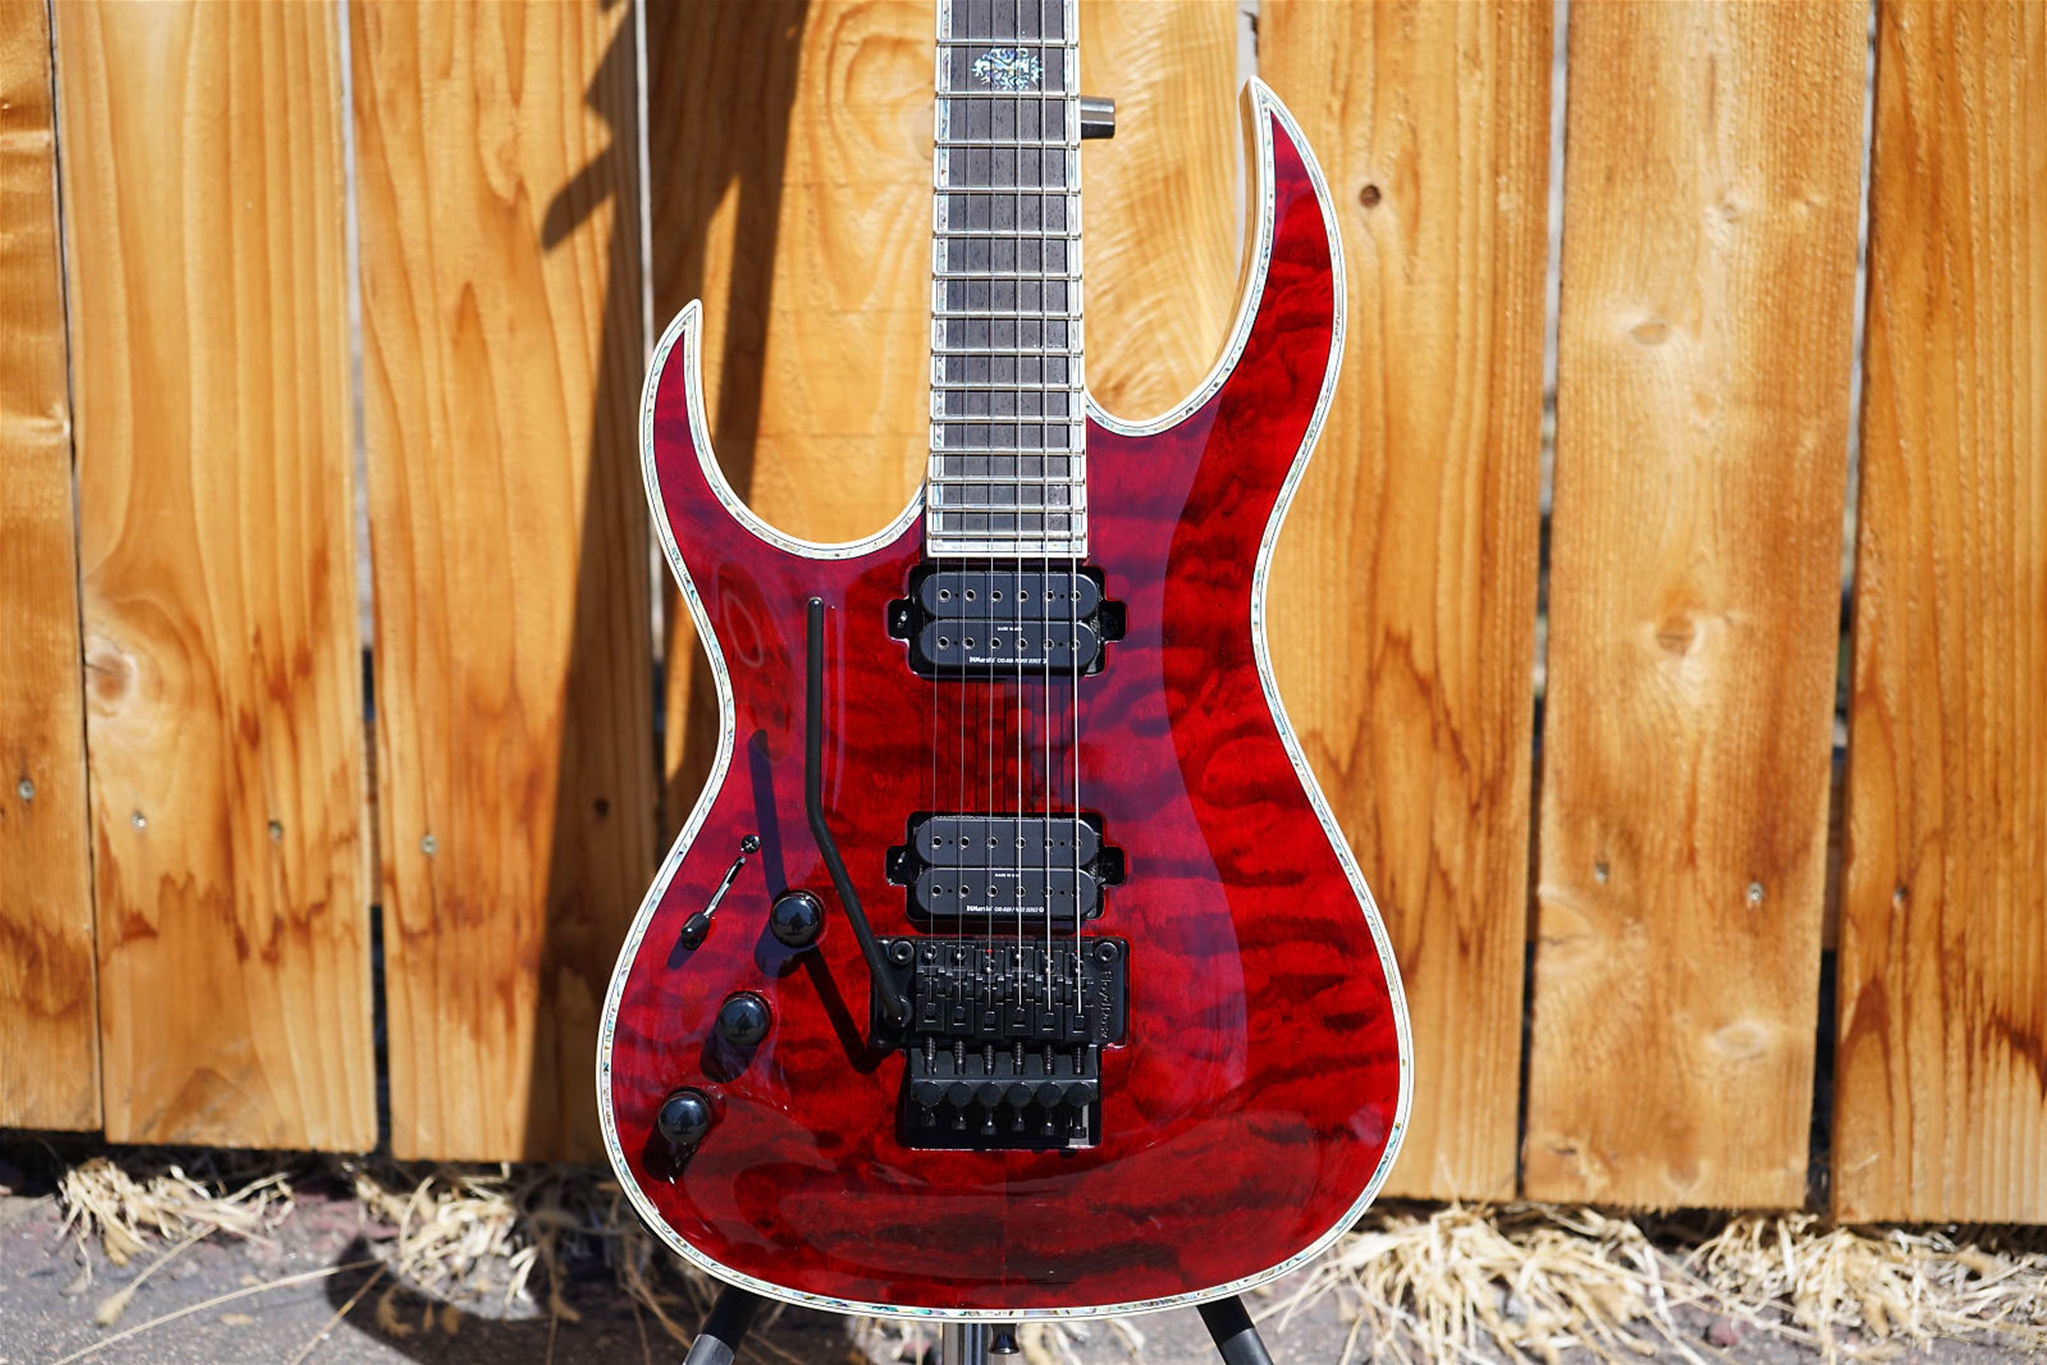 B.C. Rich Shredzilla Prophecy Exotic Archtop FR Black Cherry Left Handed 6-String Electric